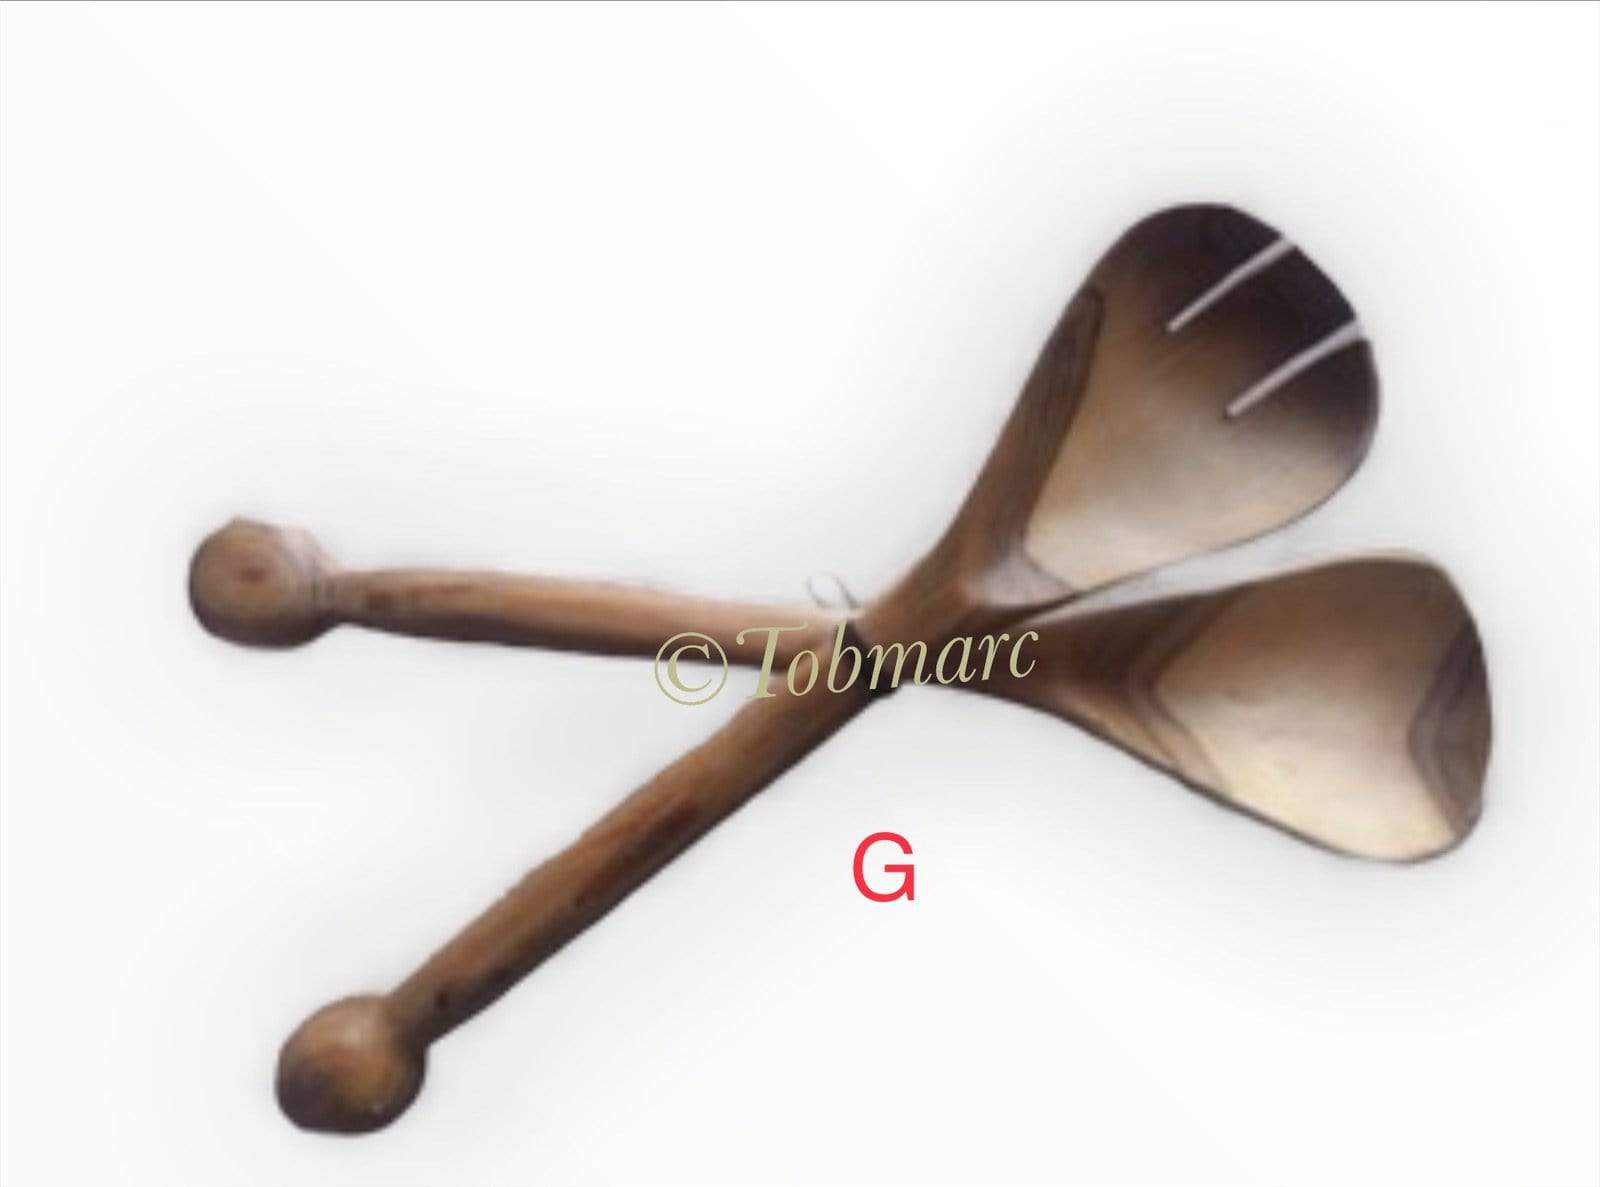 Tobmarc Home Decor & Gifts  Assorted Handcrafted Wood Serving Spoon